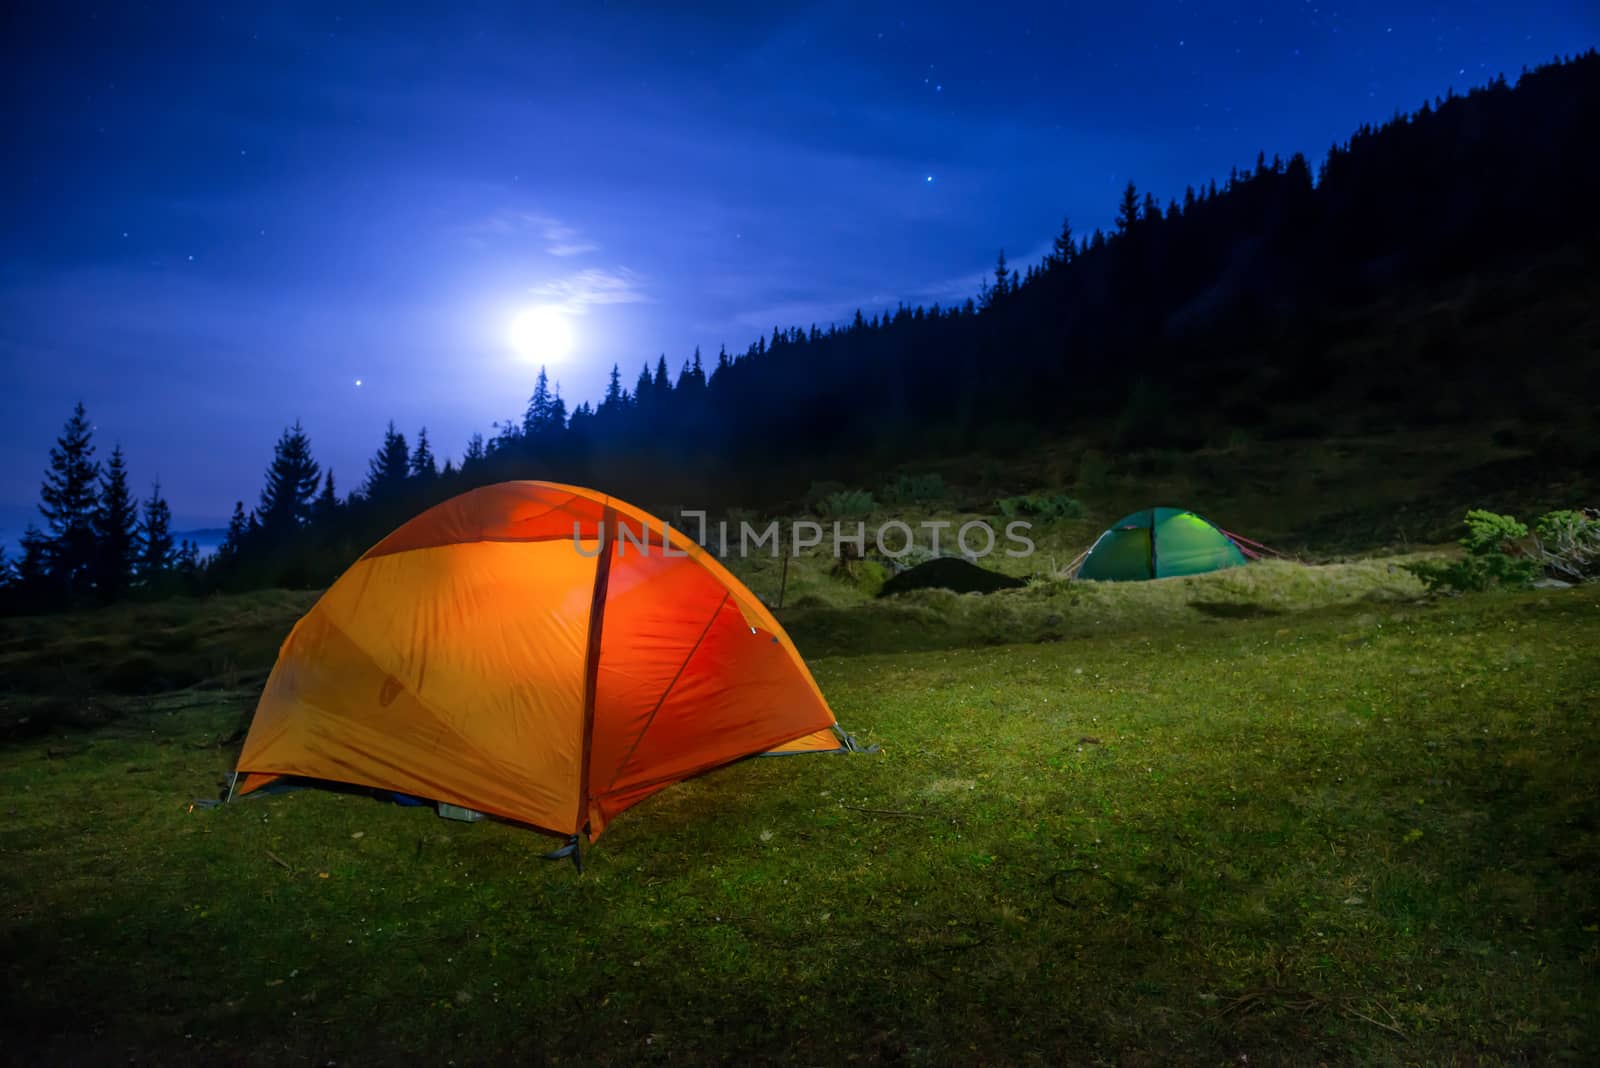 Two Illuminated orange and green camping tents by vapi